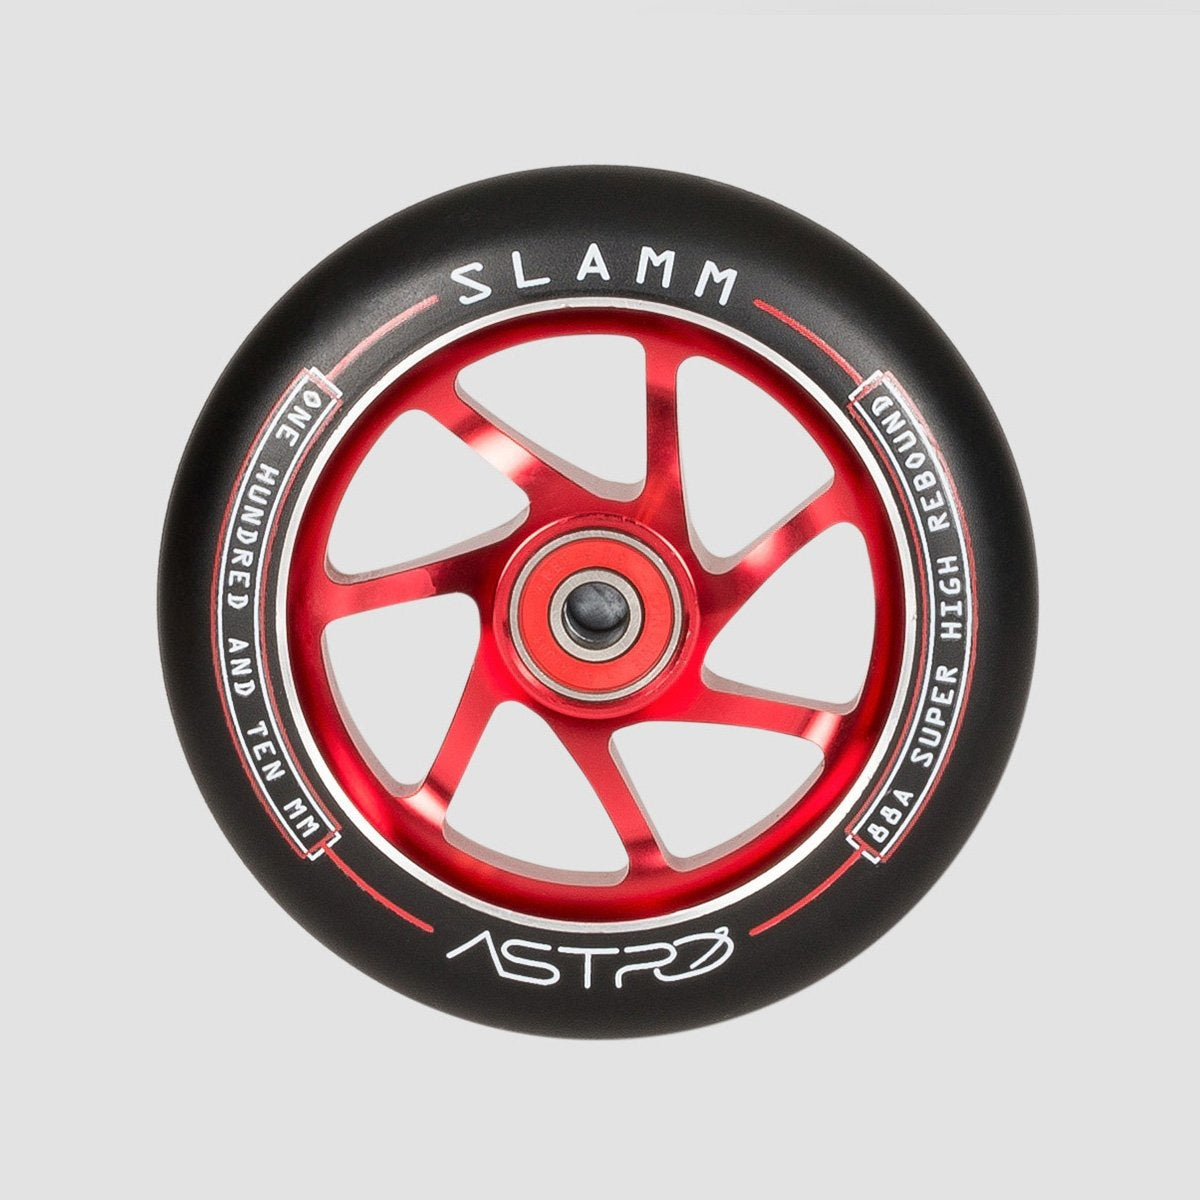 Slamm Astro Scooter Wheel x1 Red 110mm - Scooter